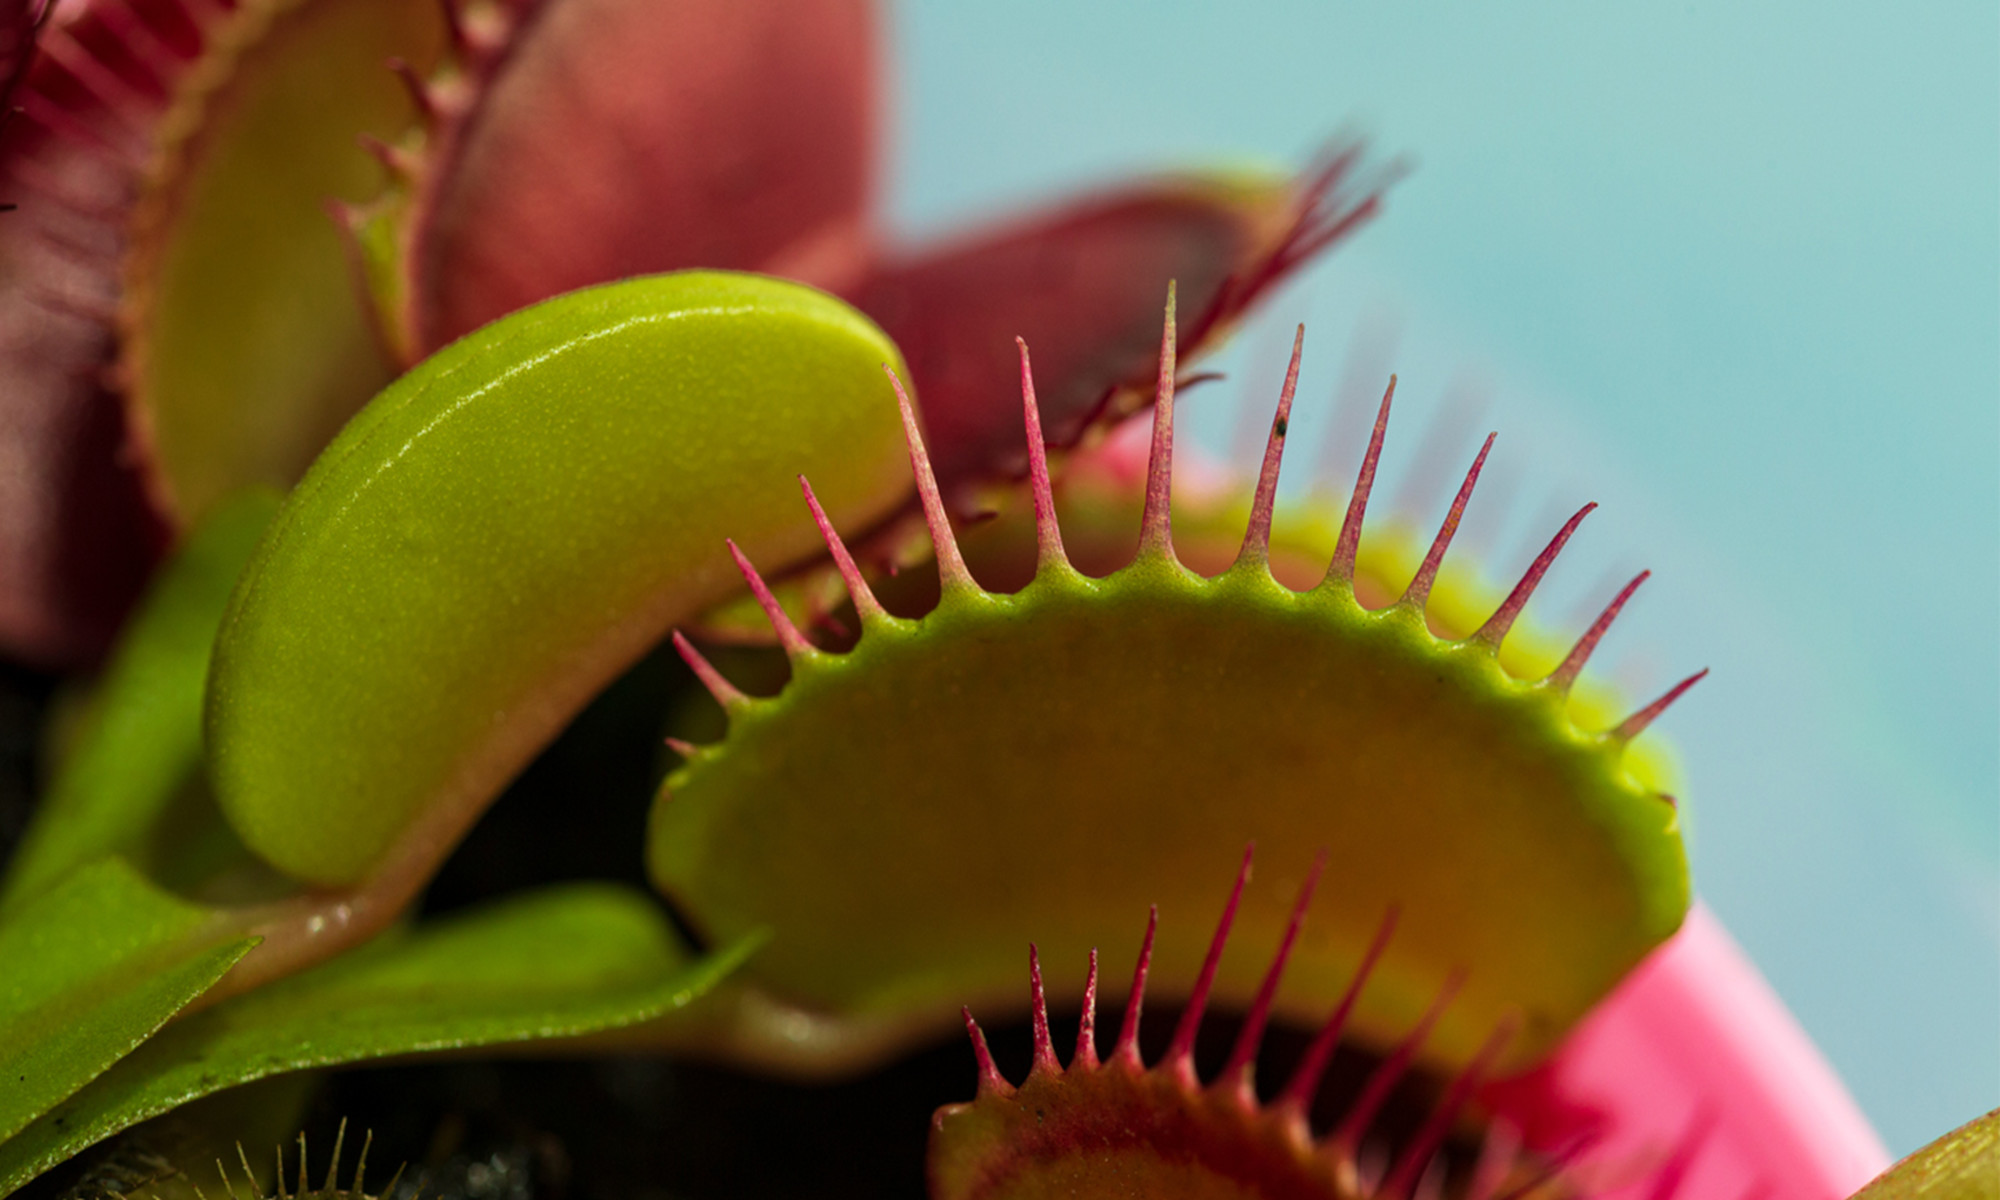 How to Grow and Care for a Venus Flytrap